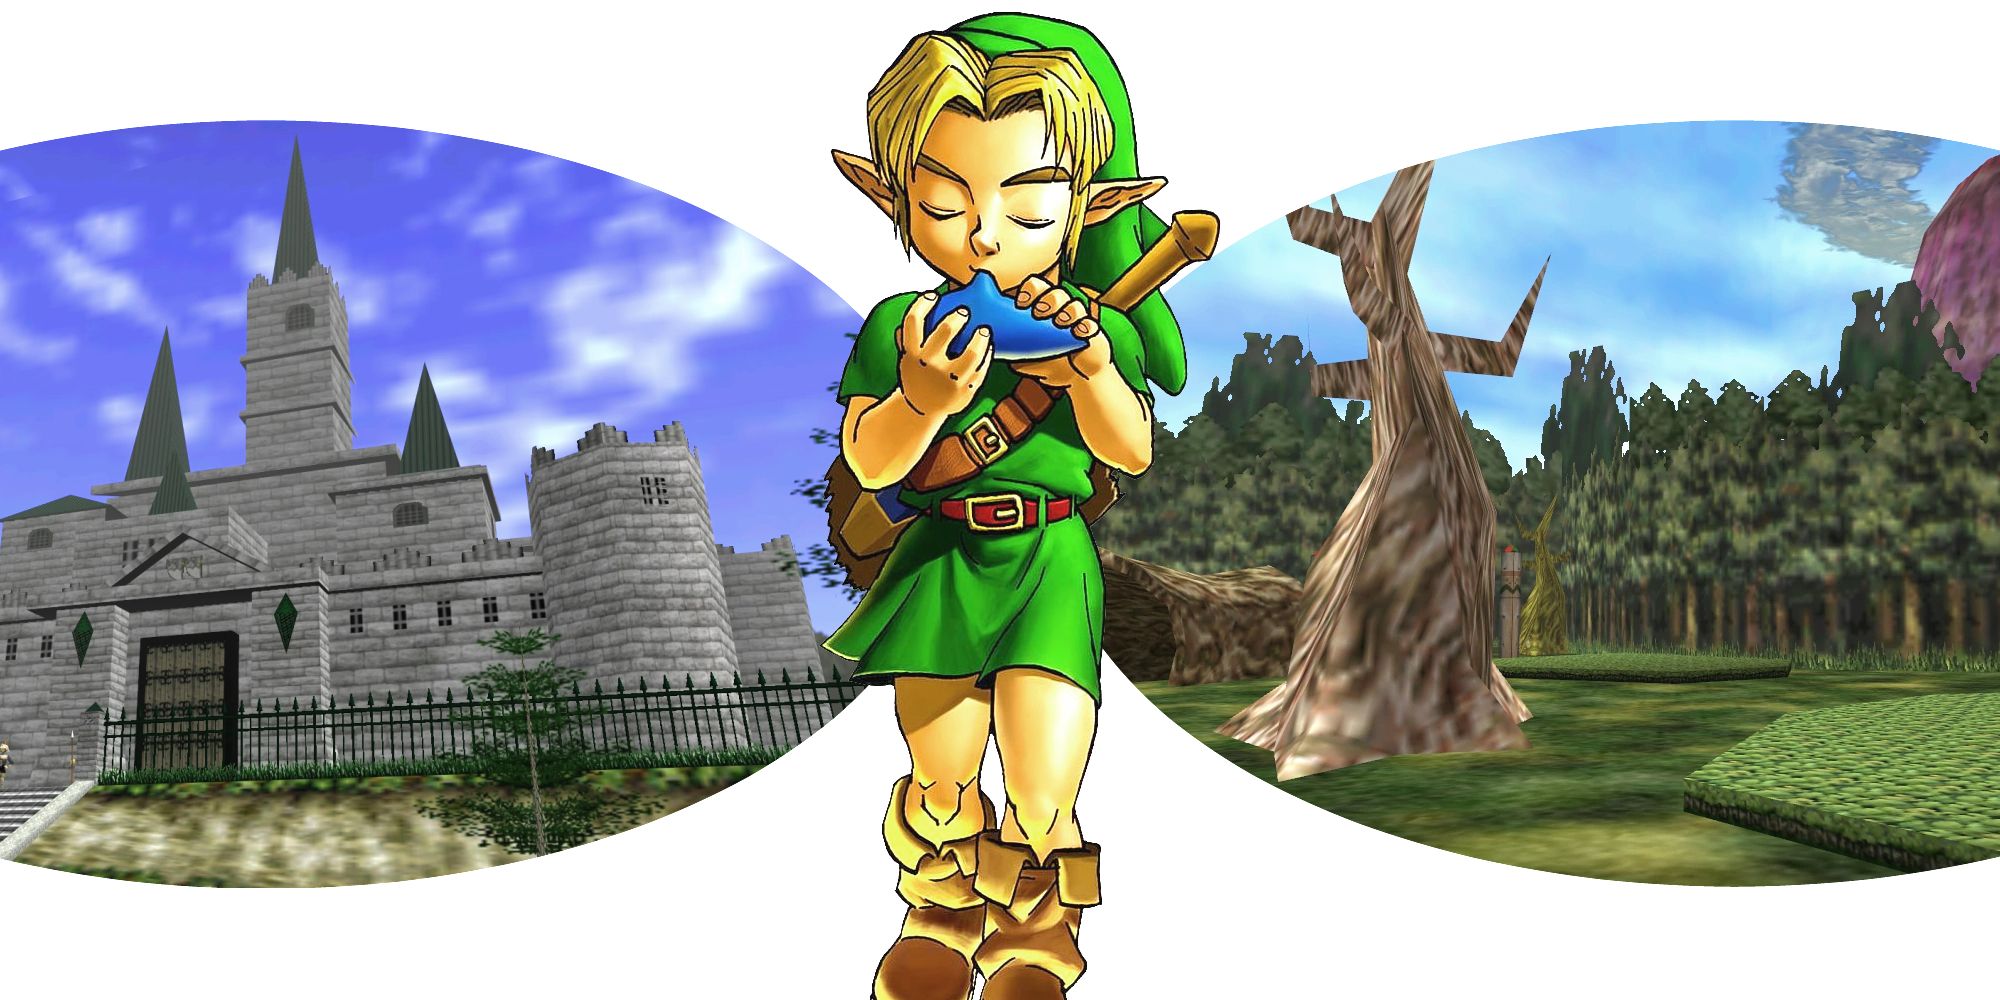 The Song Of Healing Stole One Zelda's Lullaby Power